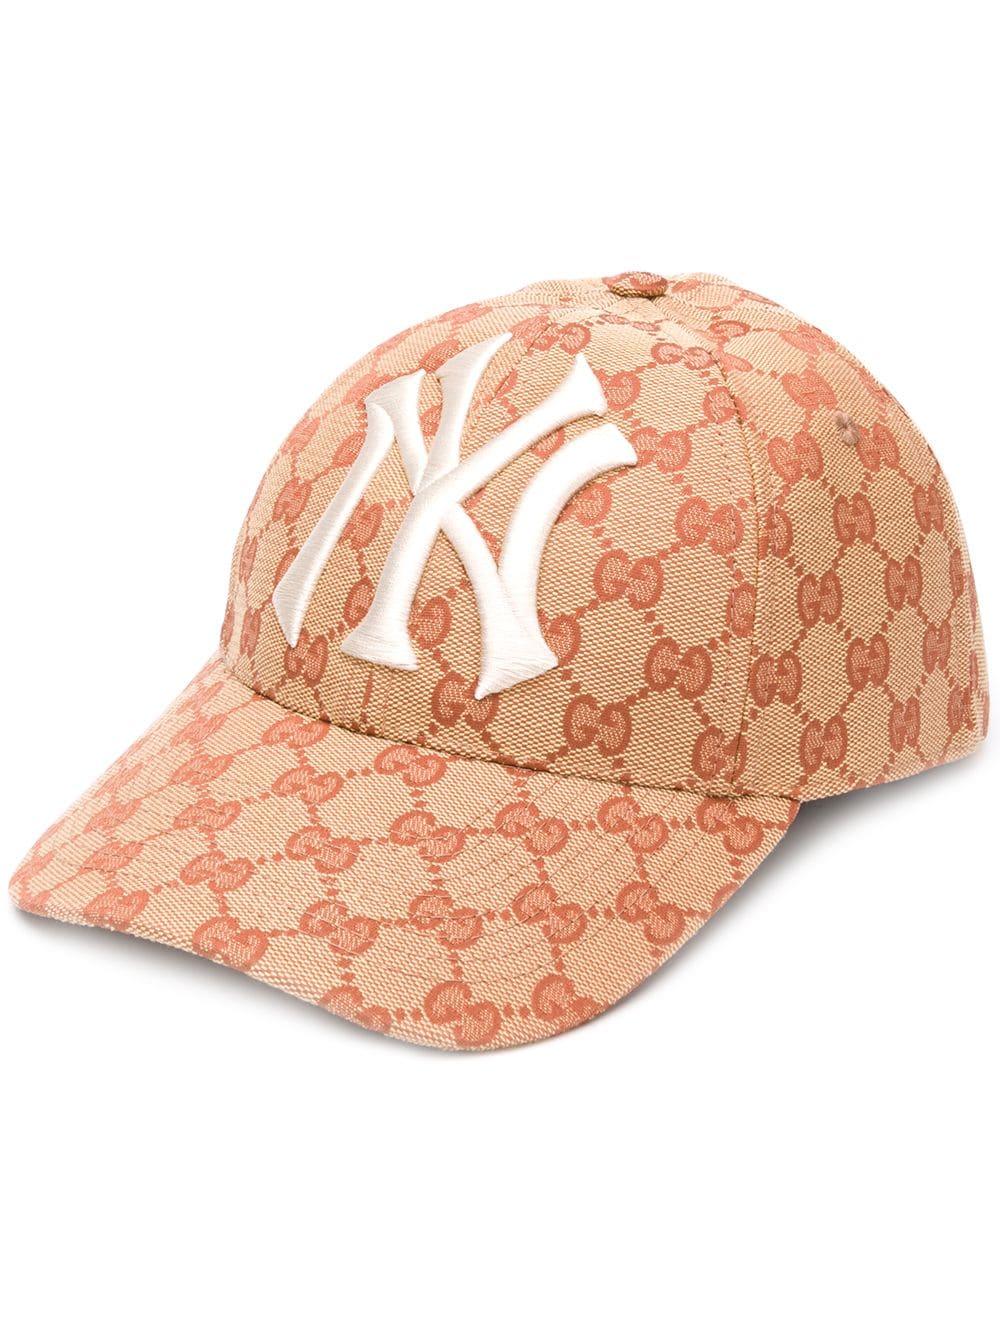 Gucci Canvas Baseball Hat With Ny Yankees Patch in Beige (Natural) - Lyst